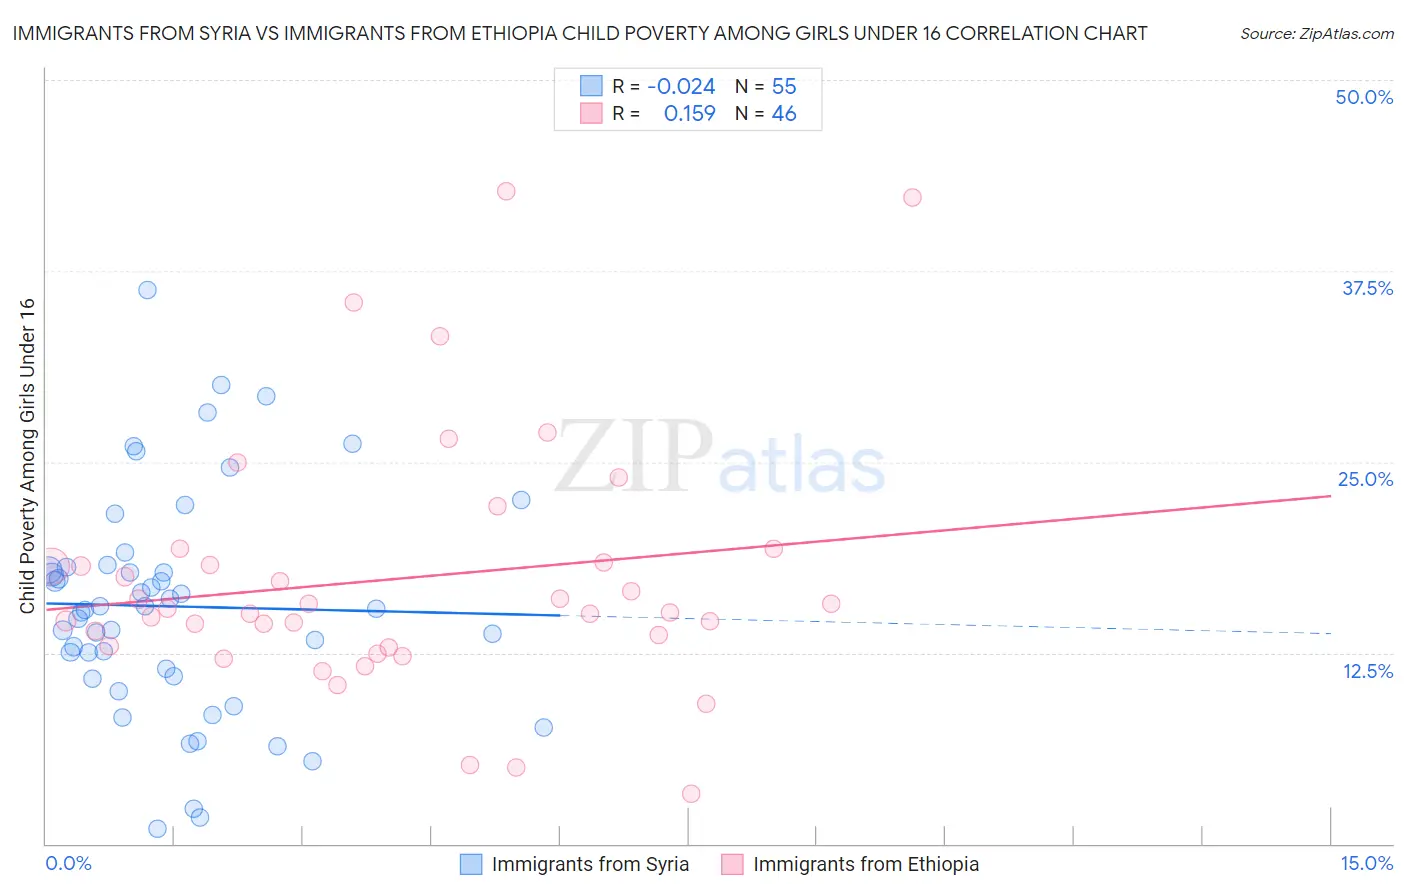 Immigrants from Syria vs Immigrants from Ethiopia Child Poverty Among Girls Under 16